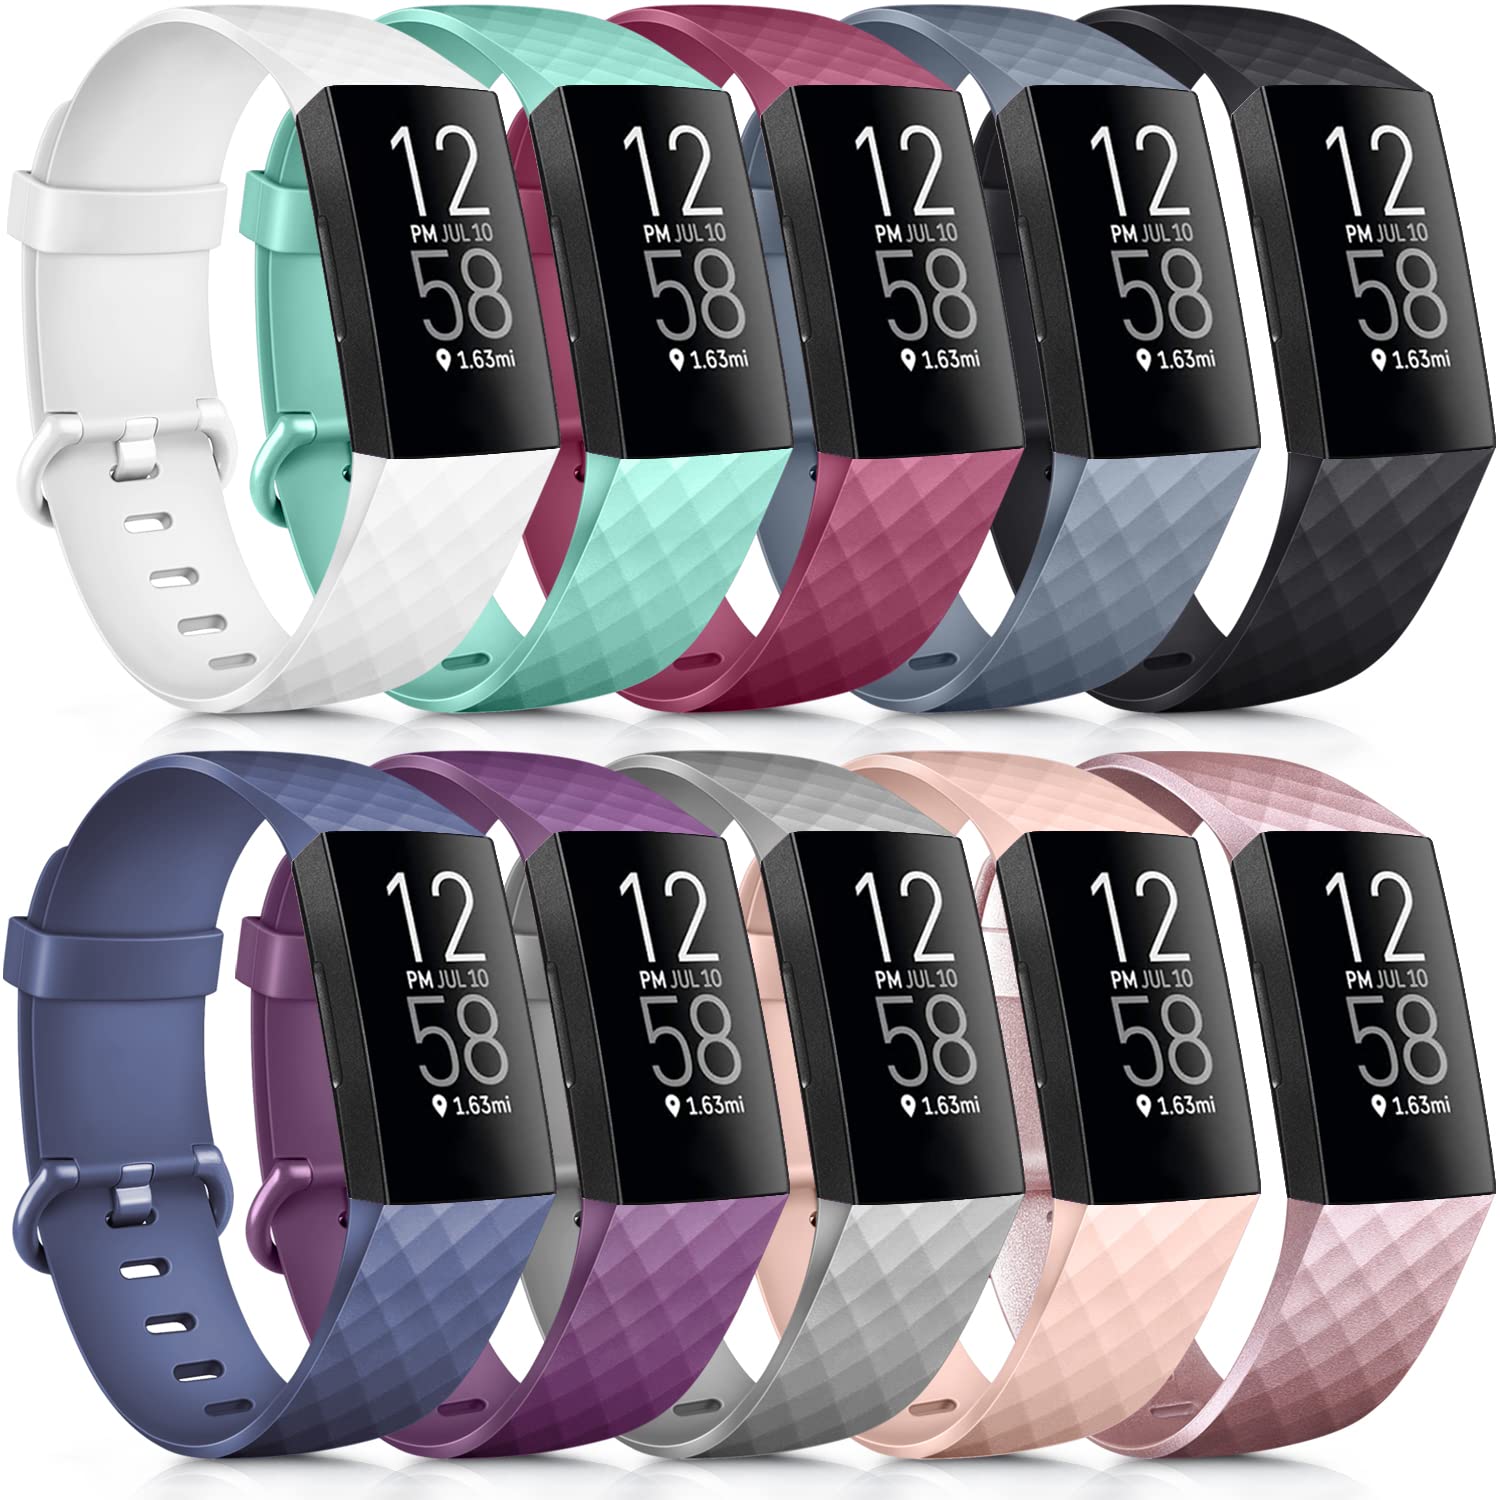 Silicone Sport Bands For Fitbit Charge 3 / Charge 4 Tracker